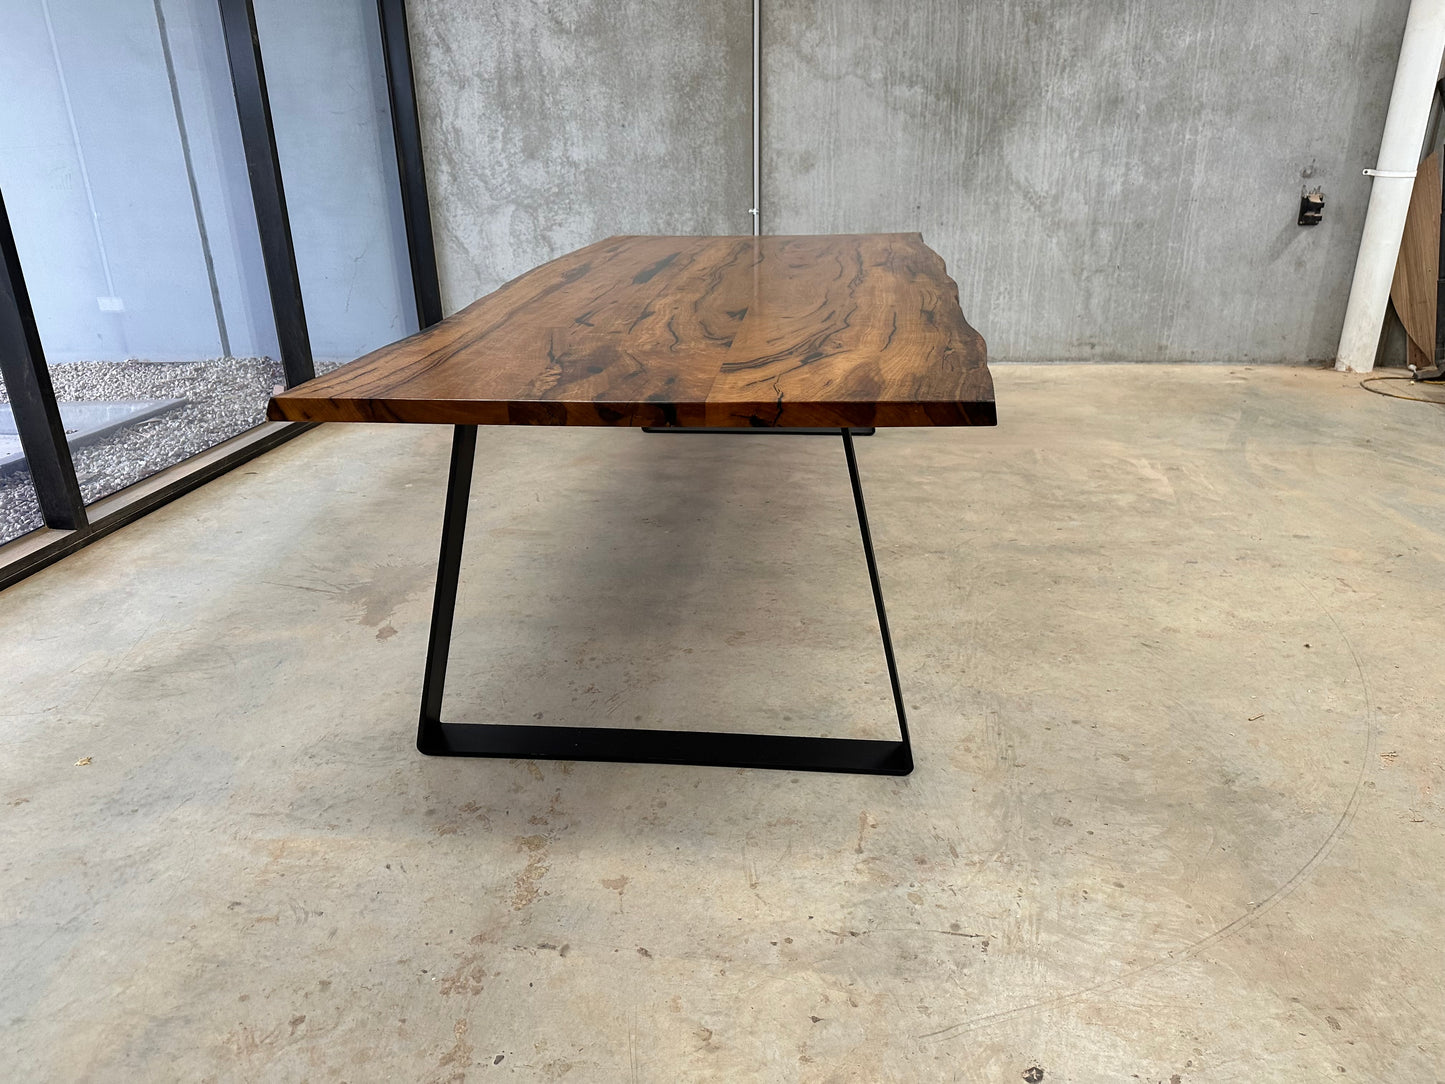 Available Now - Marri Live Edge Dining Table 2.8m long